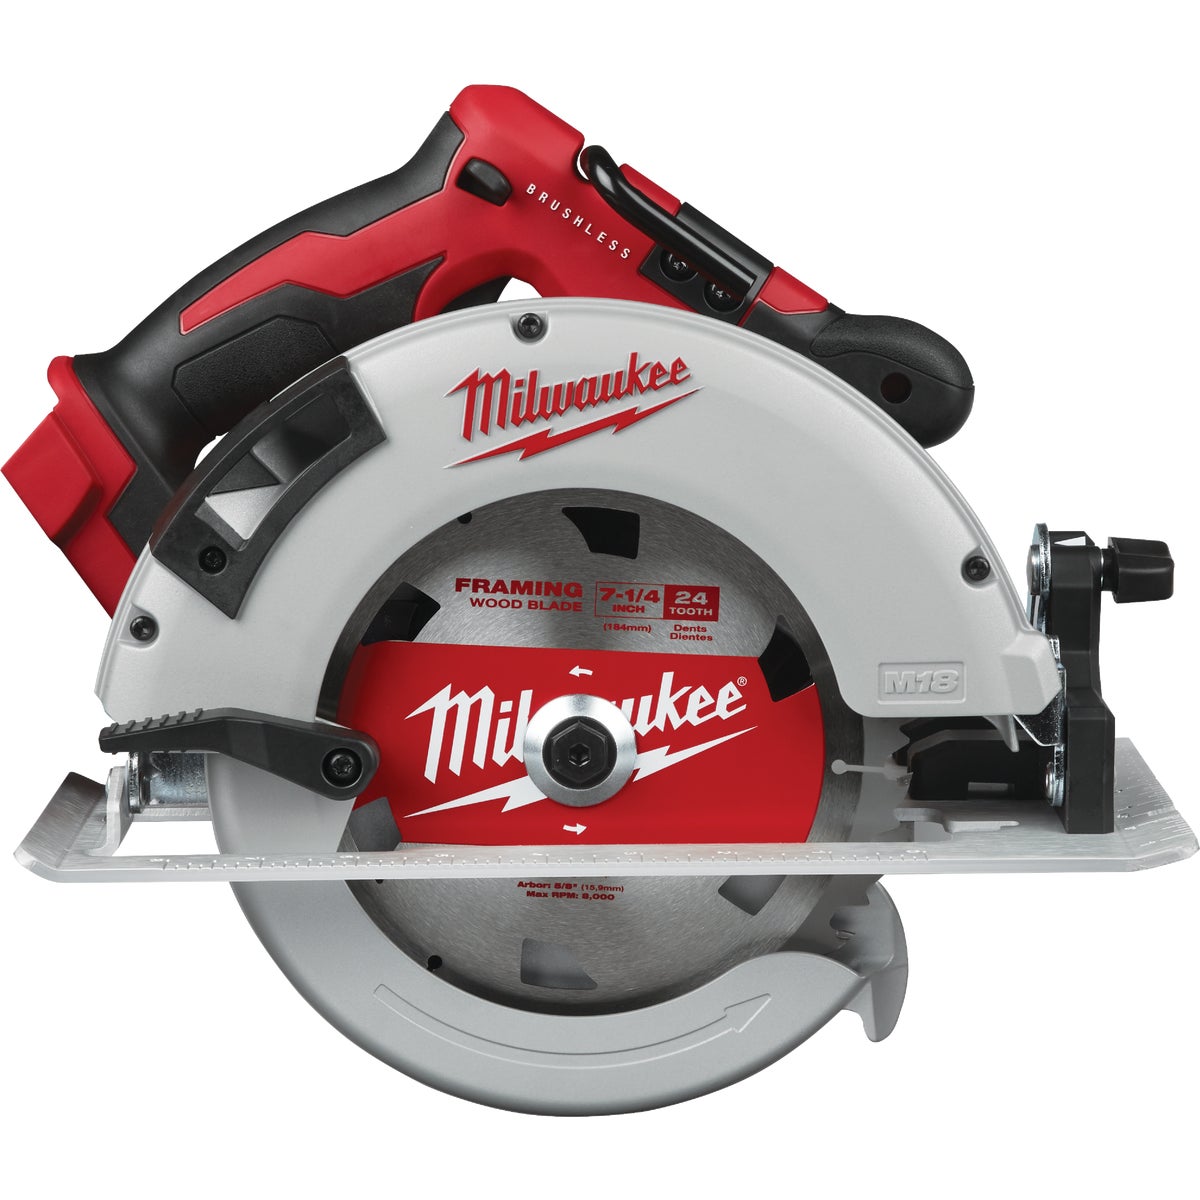 Item 303556, M18 Brushless 7-1/4" Circular Saw delivers up to 40% more power than 